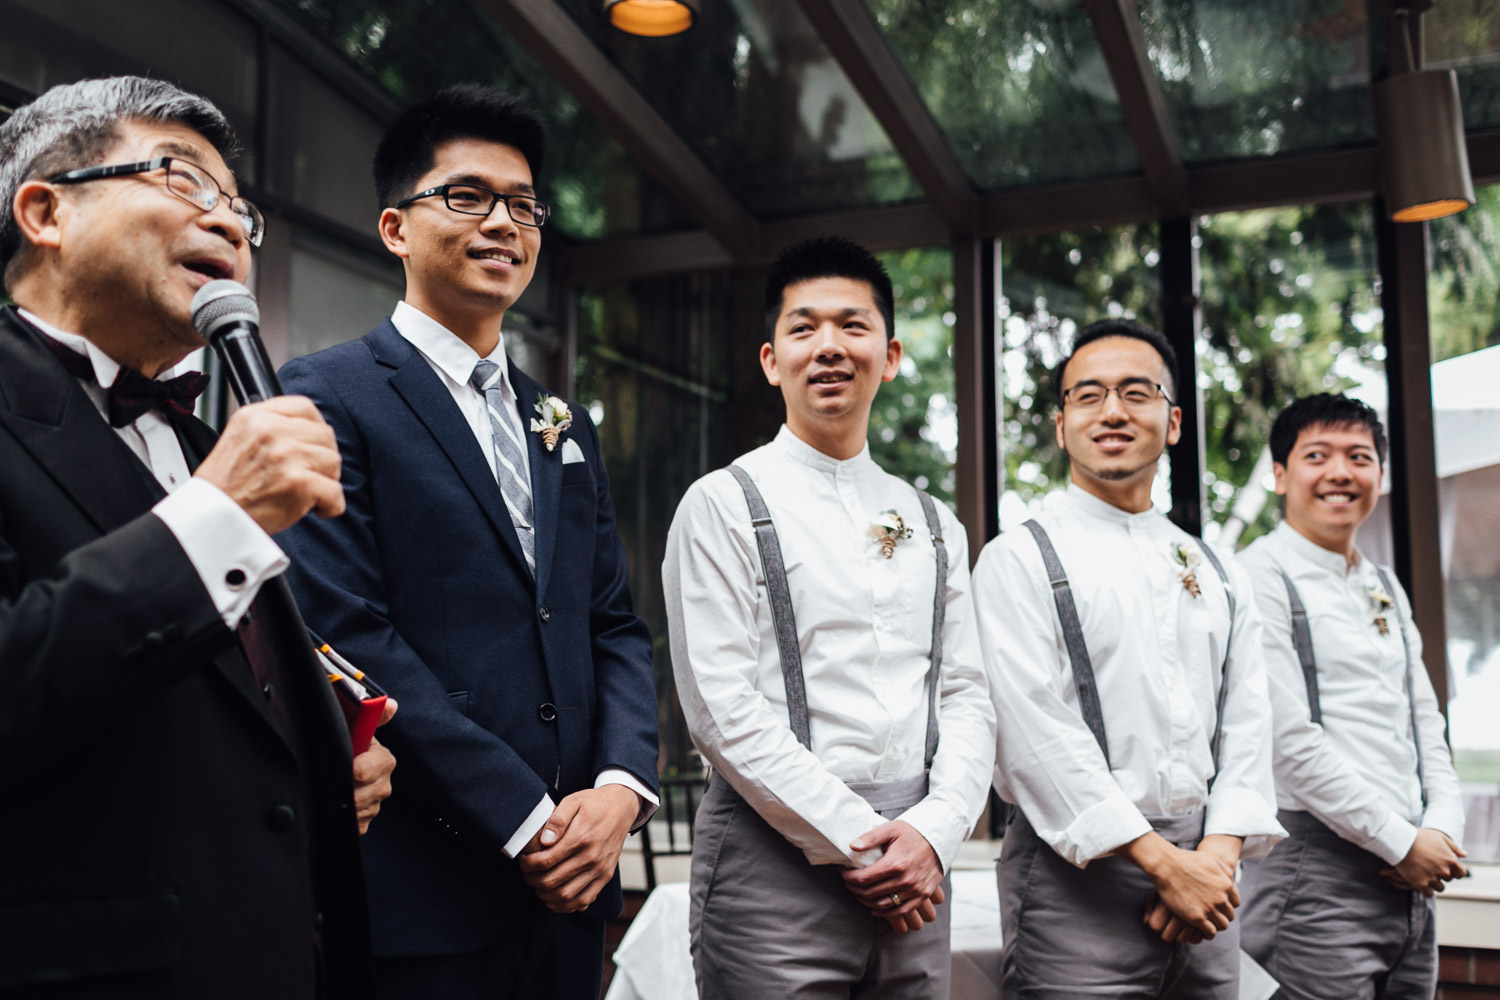 vancouver wedding photography at brockhouse restaurant